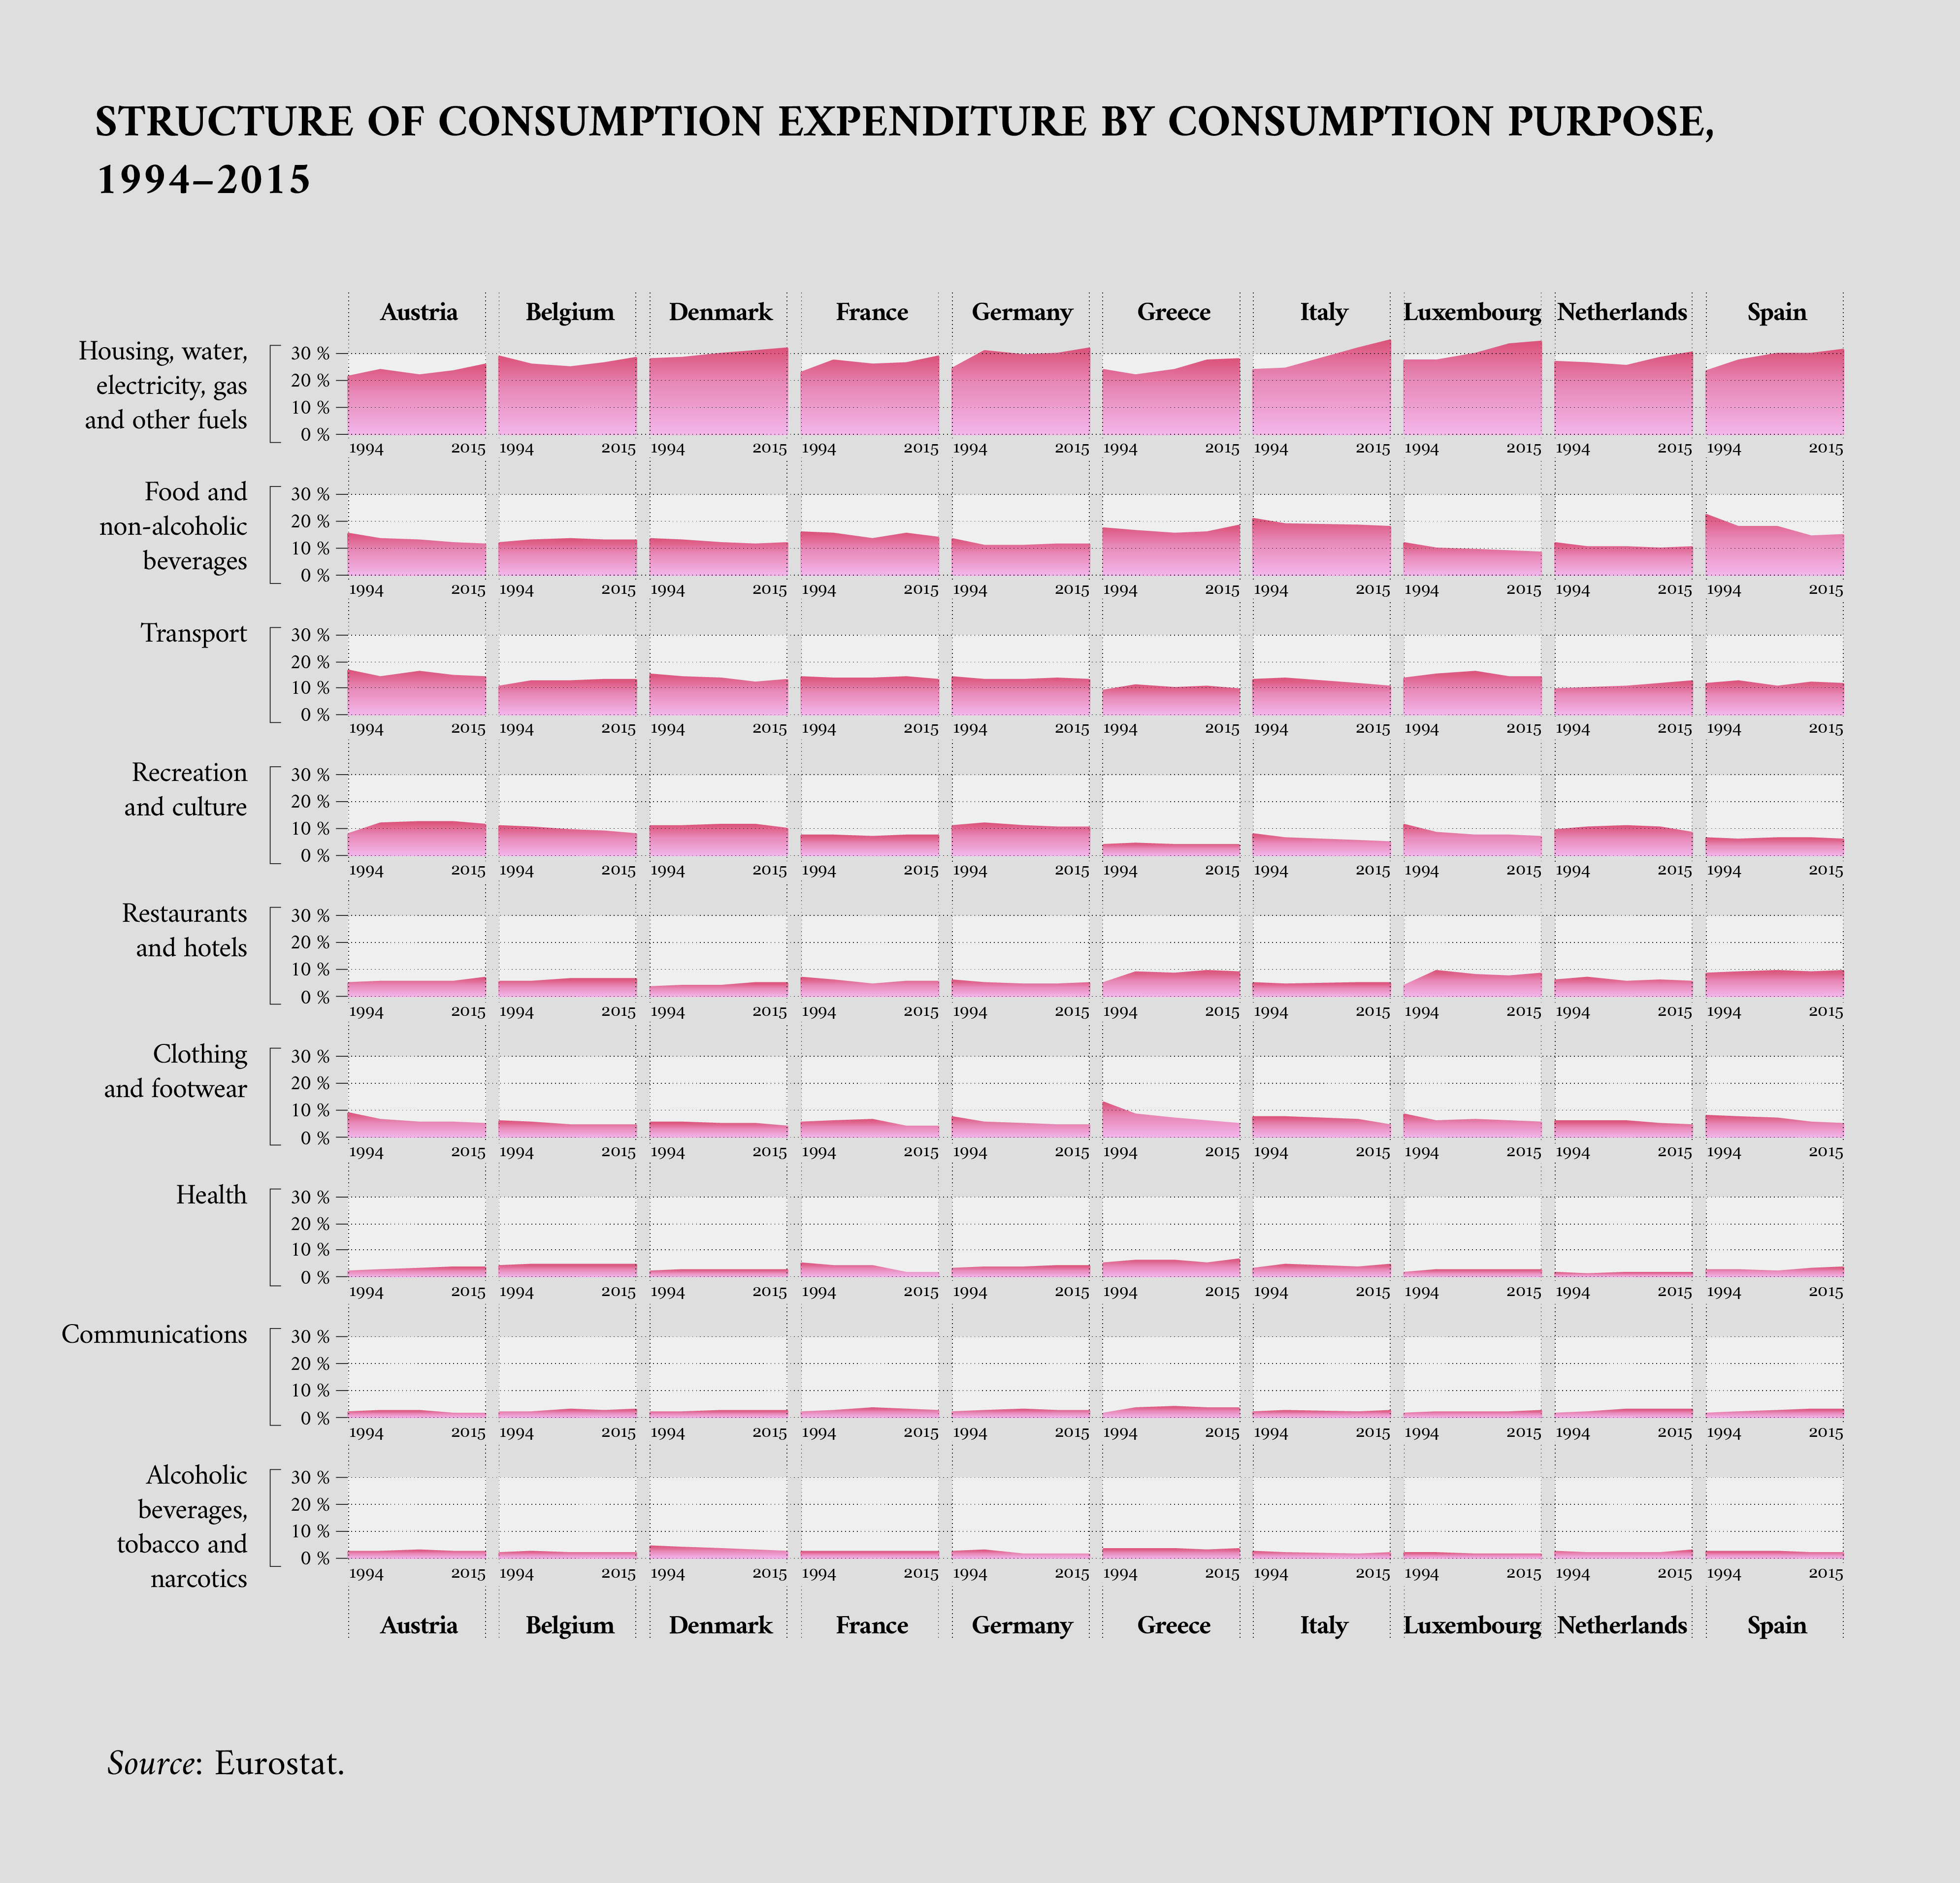 Structure of consumption expenditure by consumption purpose, 1994-2015